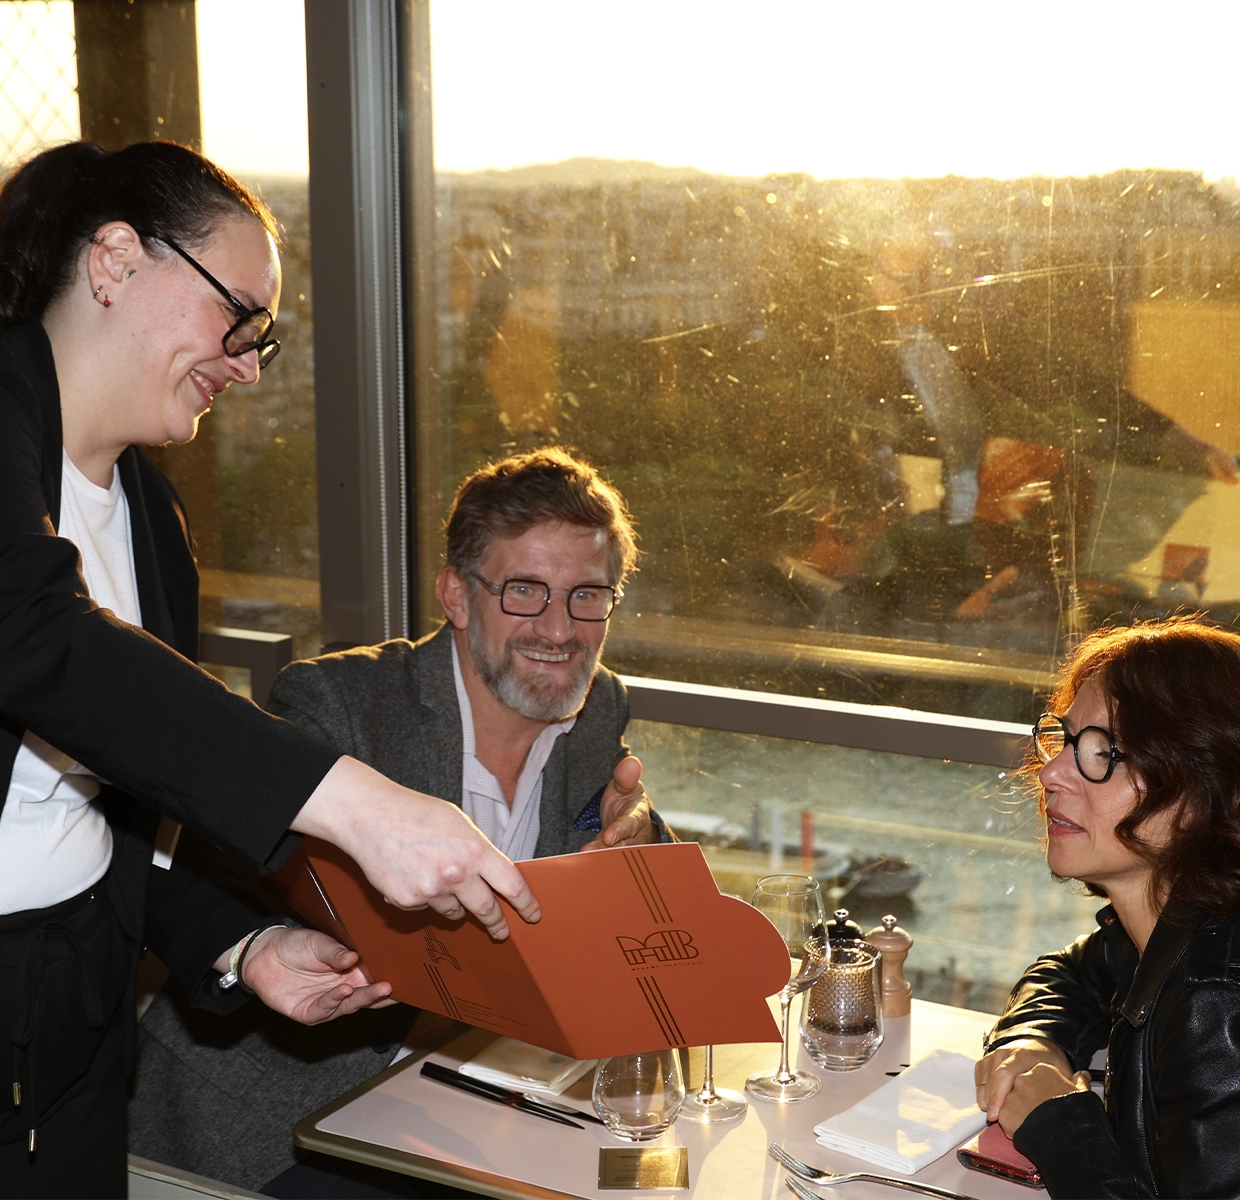 A server presents a couple with a printout of their photos during a fine dining experience, adding a personal touch to the meal.